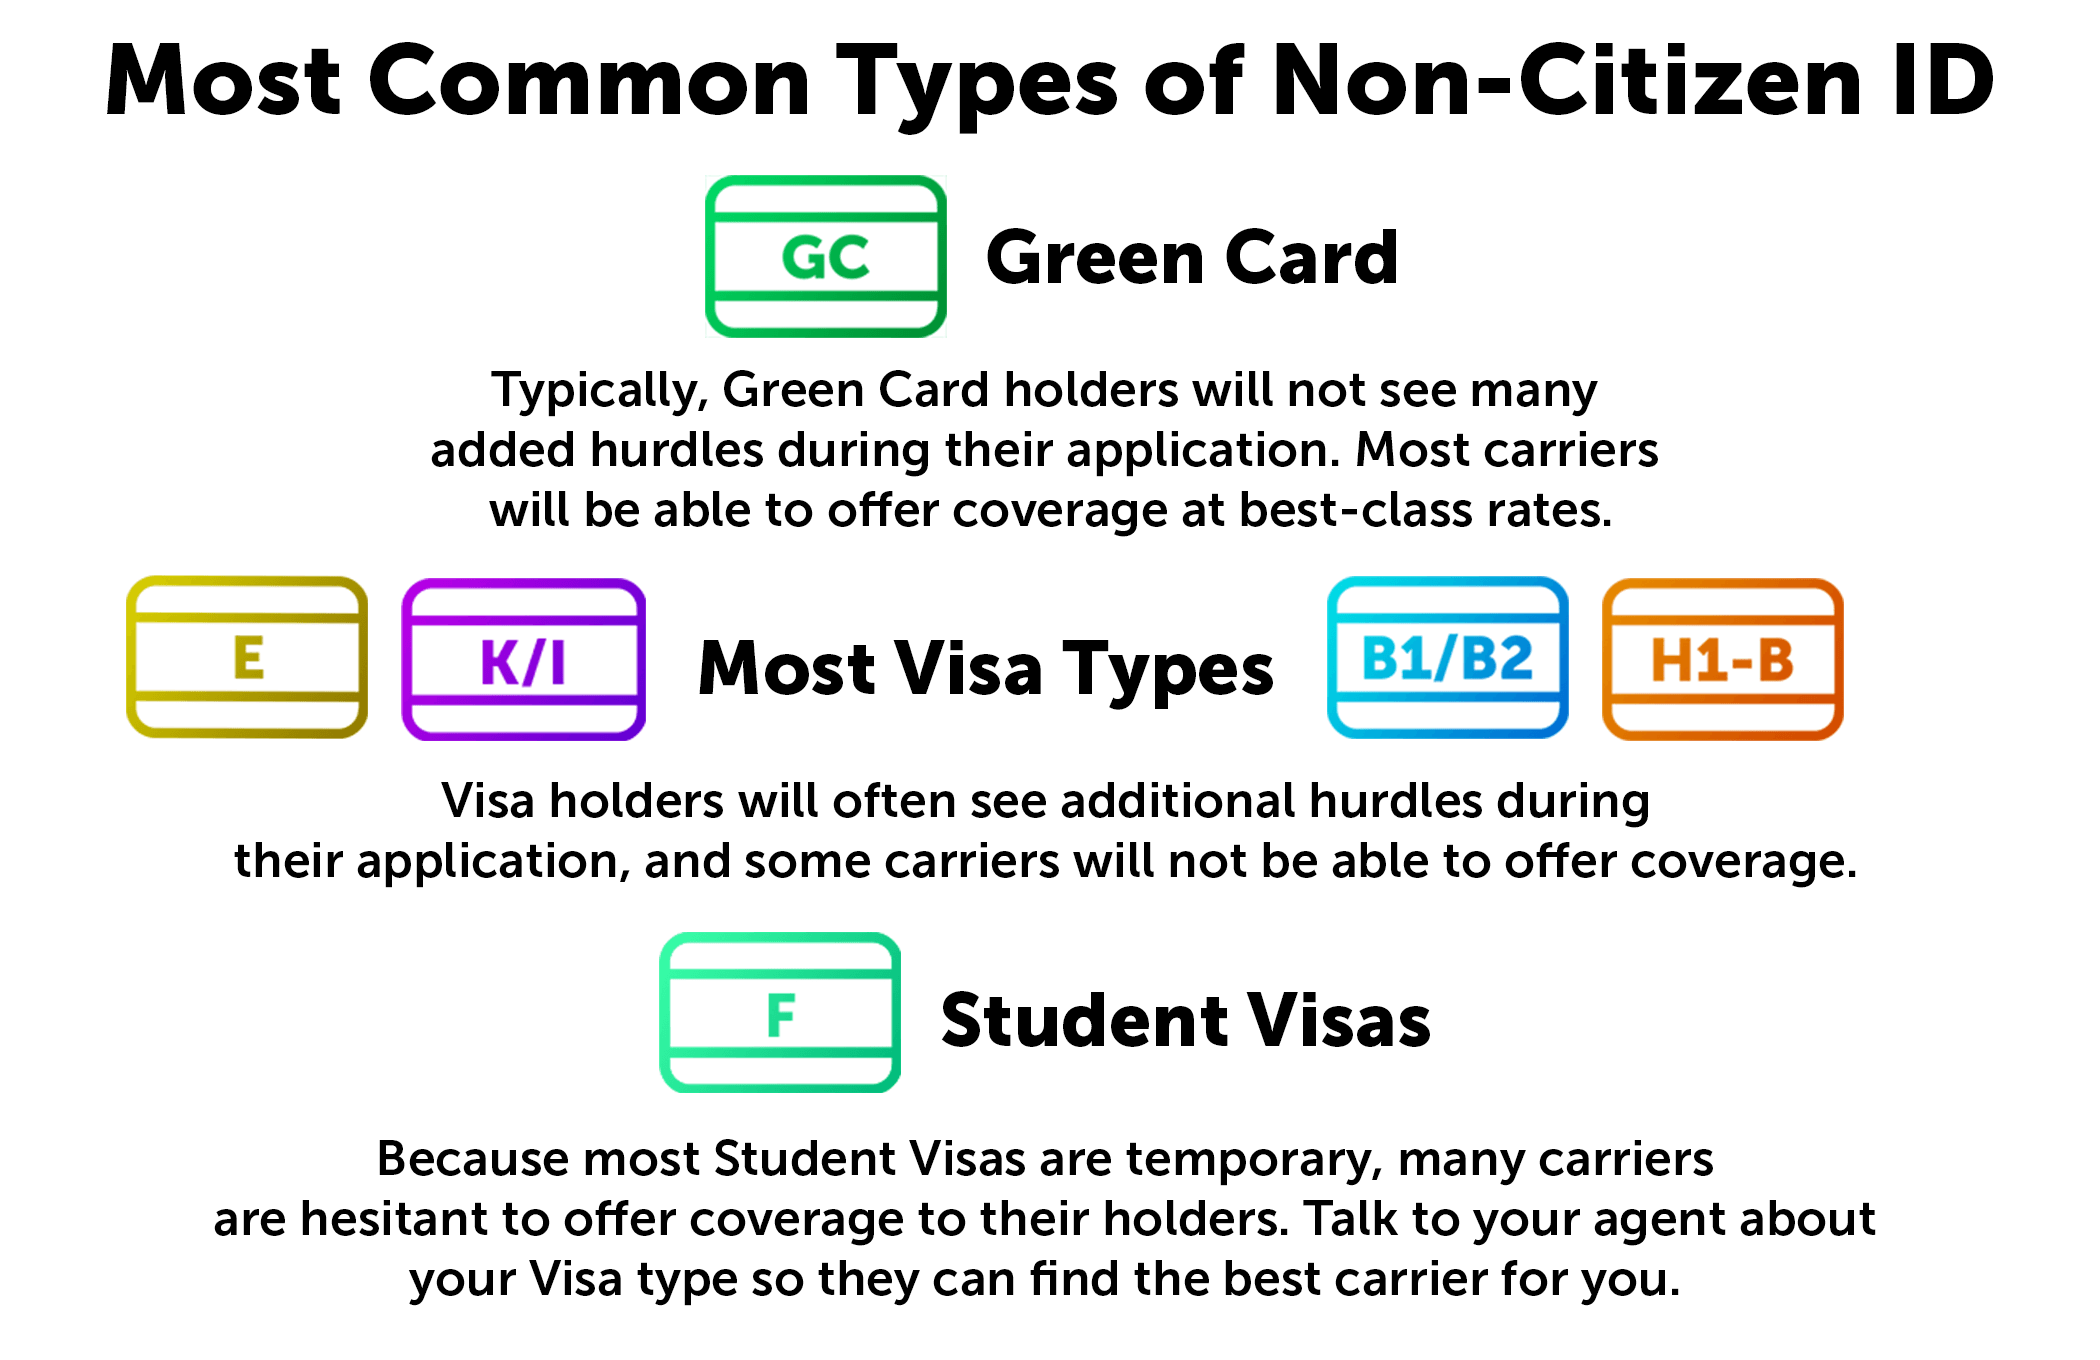 Life Insurance and Non Citizen IDs